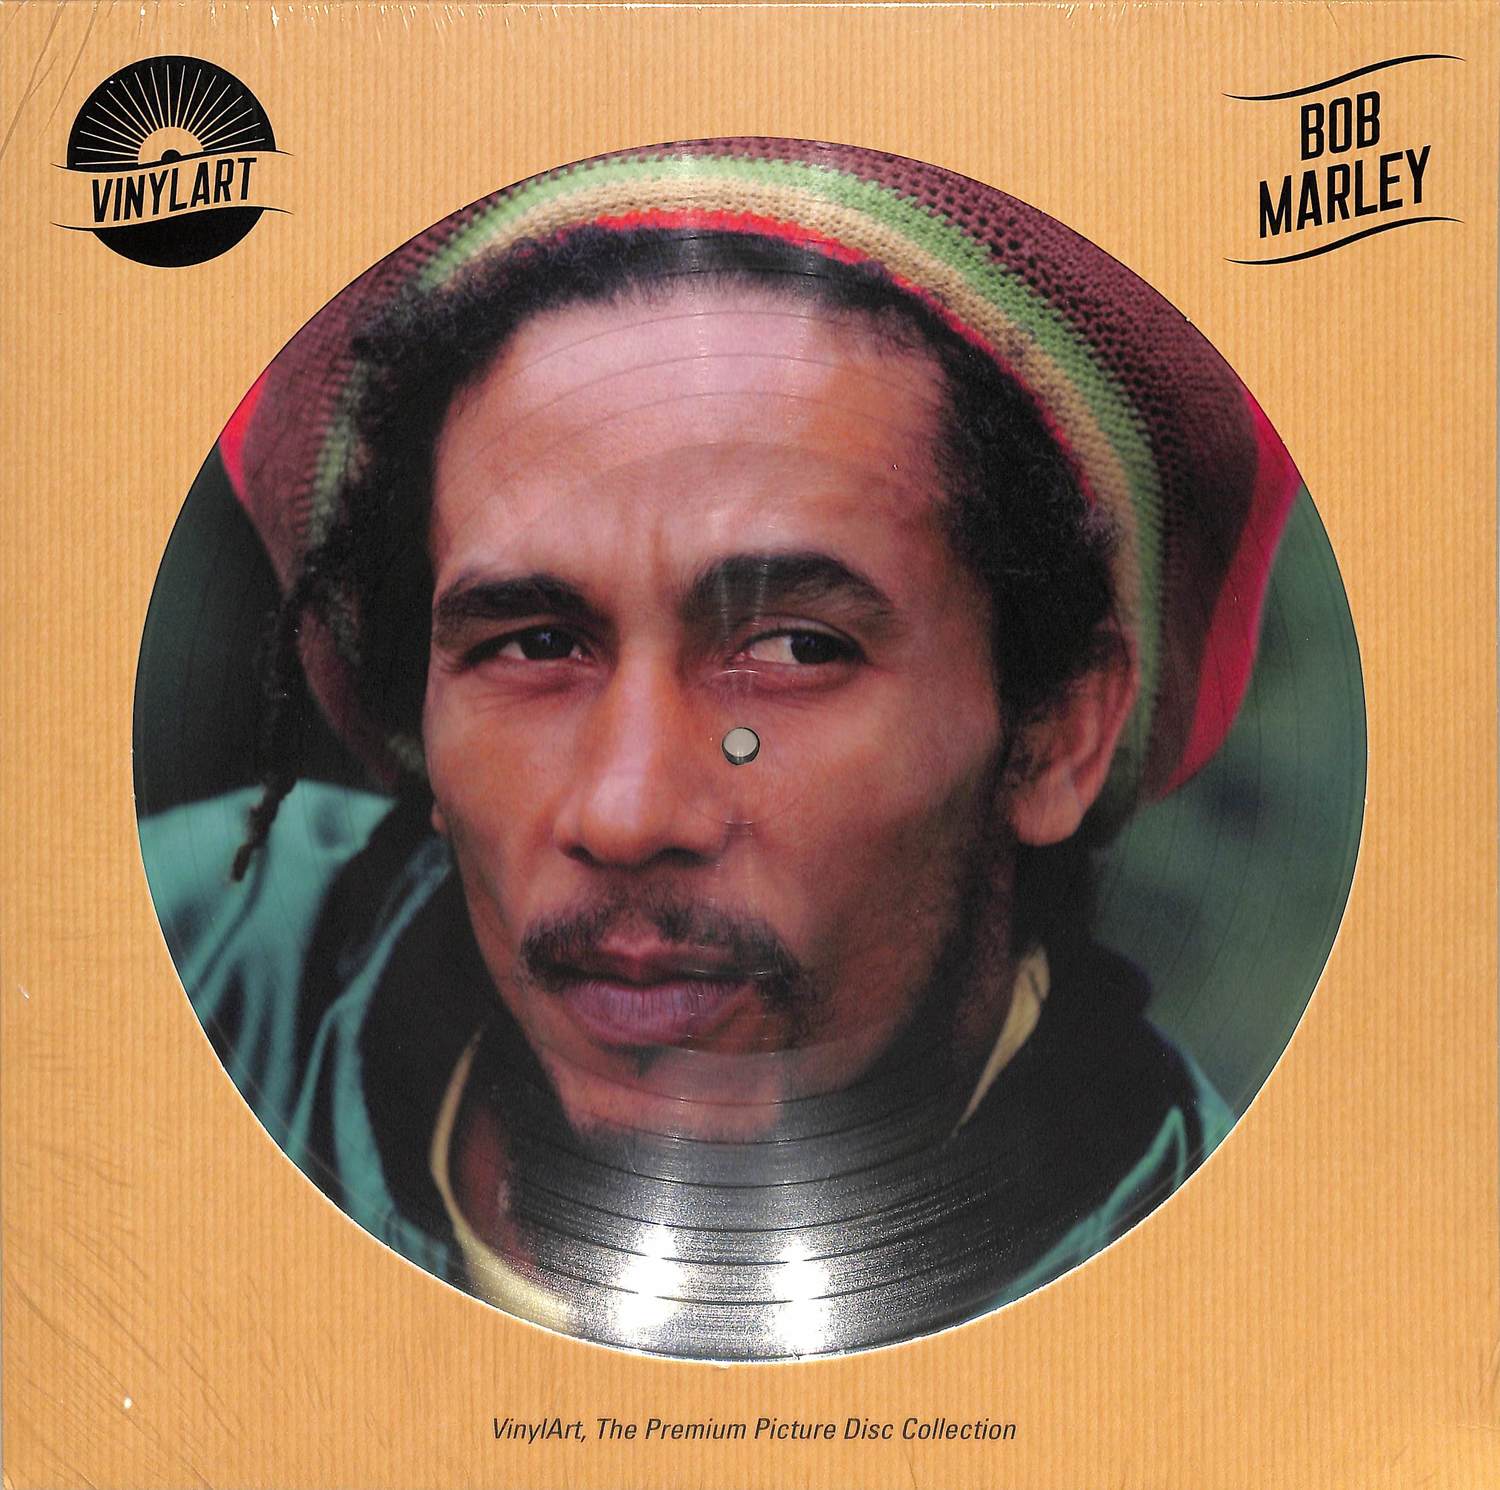 Bob Marley - VINYLART - THE PREMIUM PICTURE DISC COLLECTION 